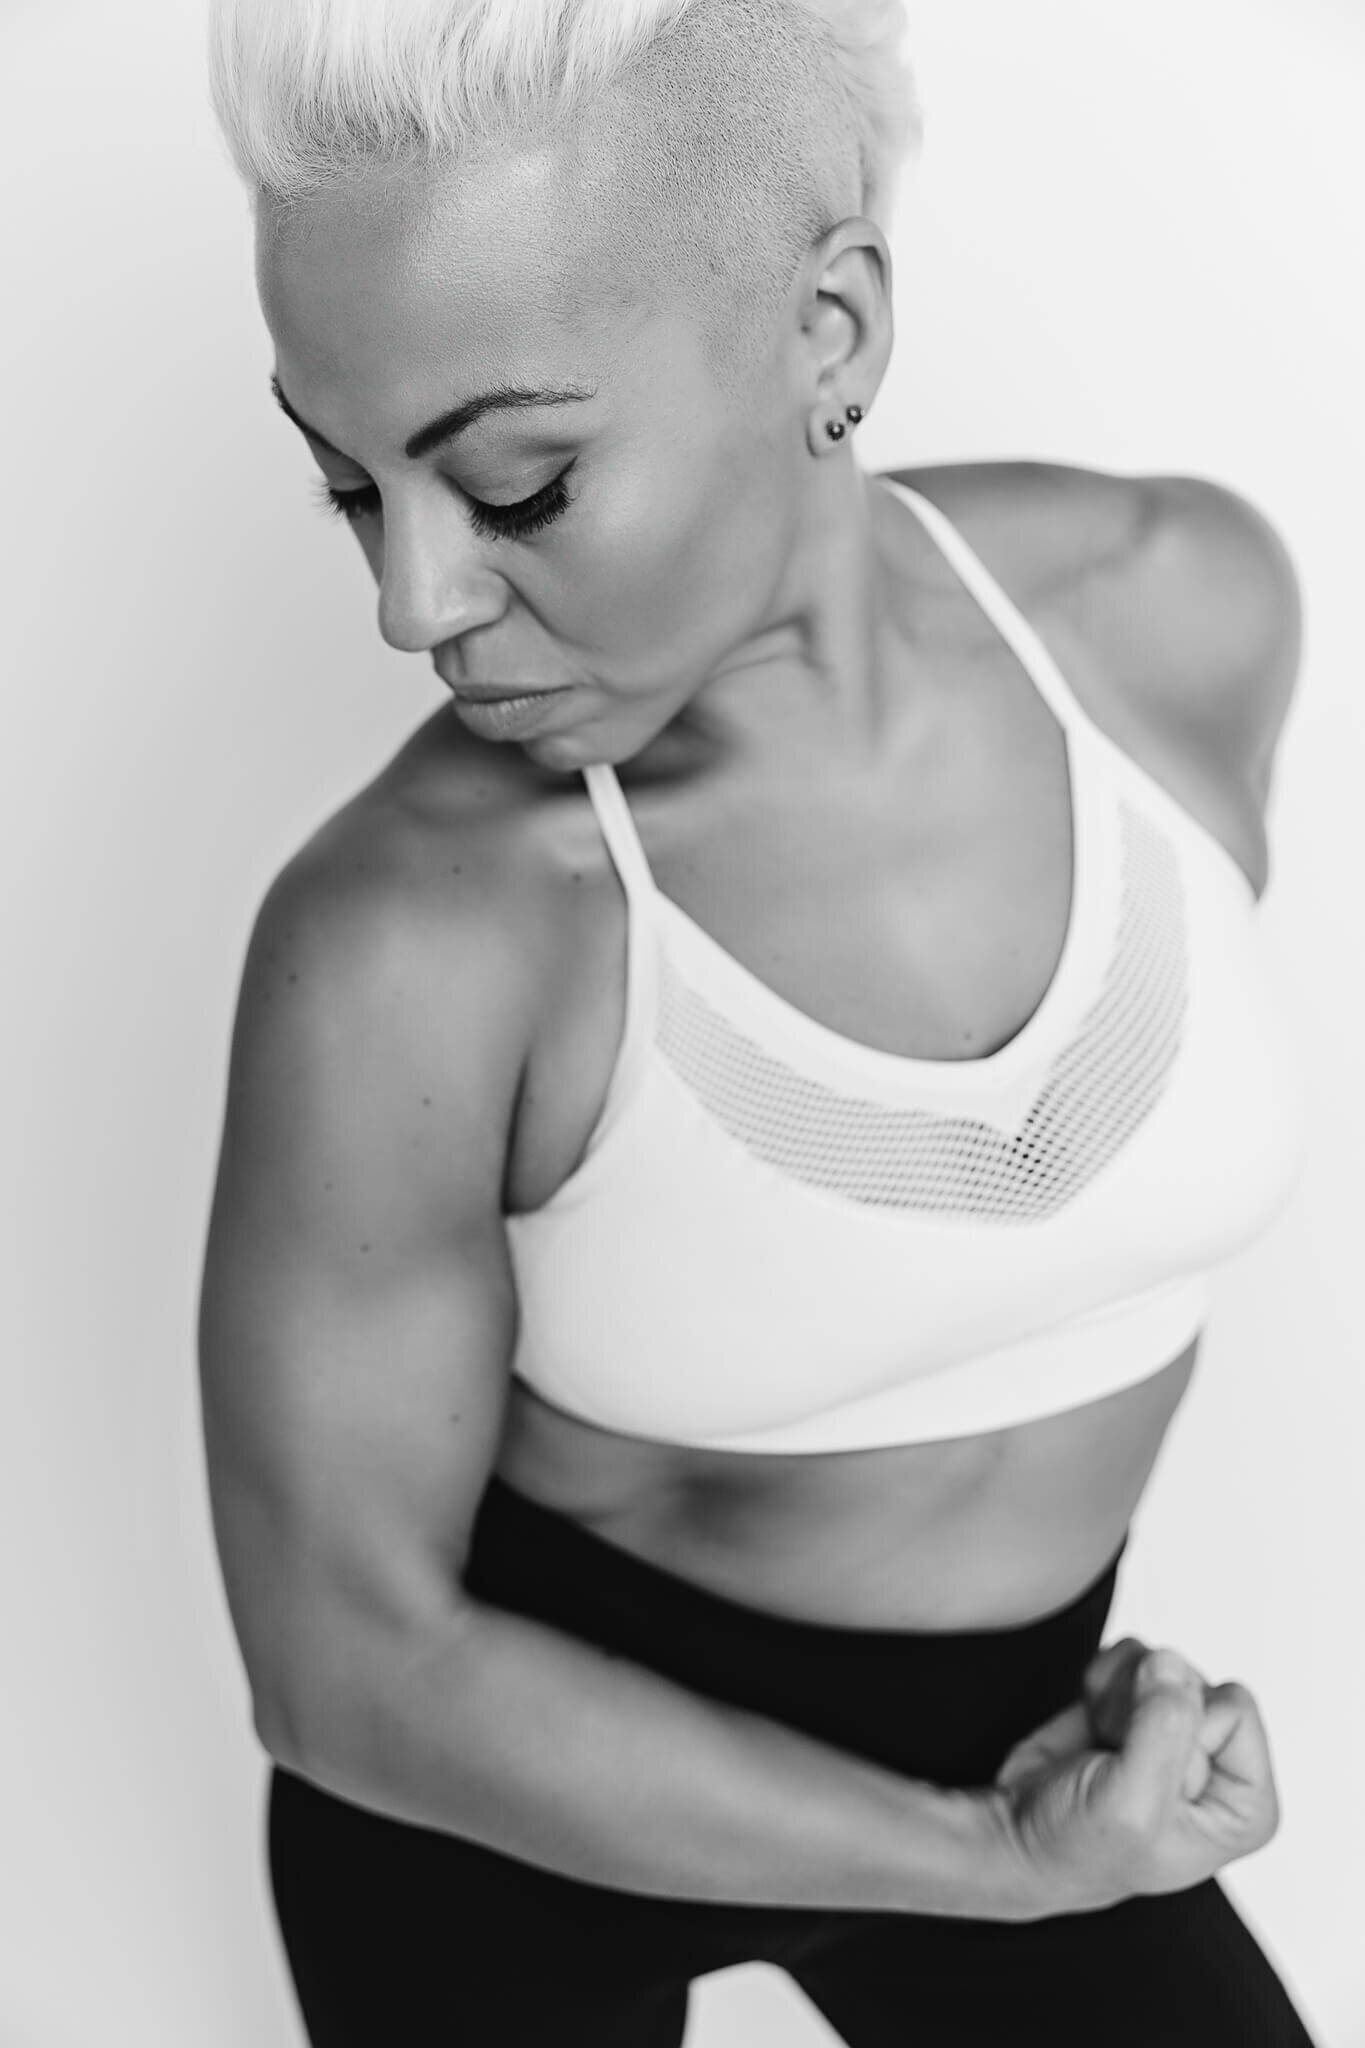 fitness figure is showing her muscles for a branding photoshoot in a black and white picture